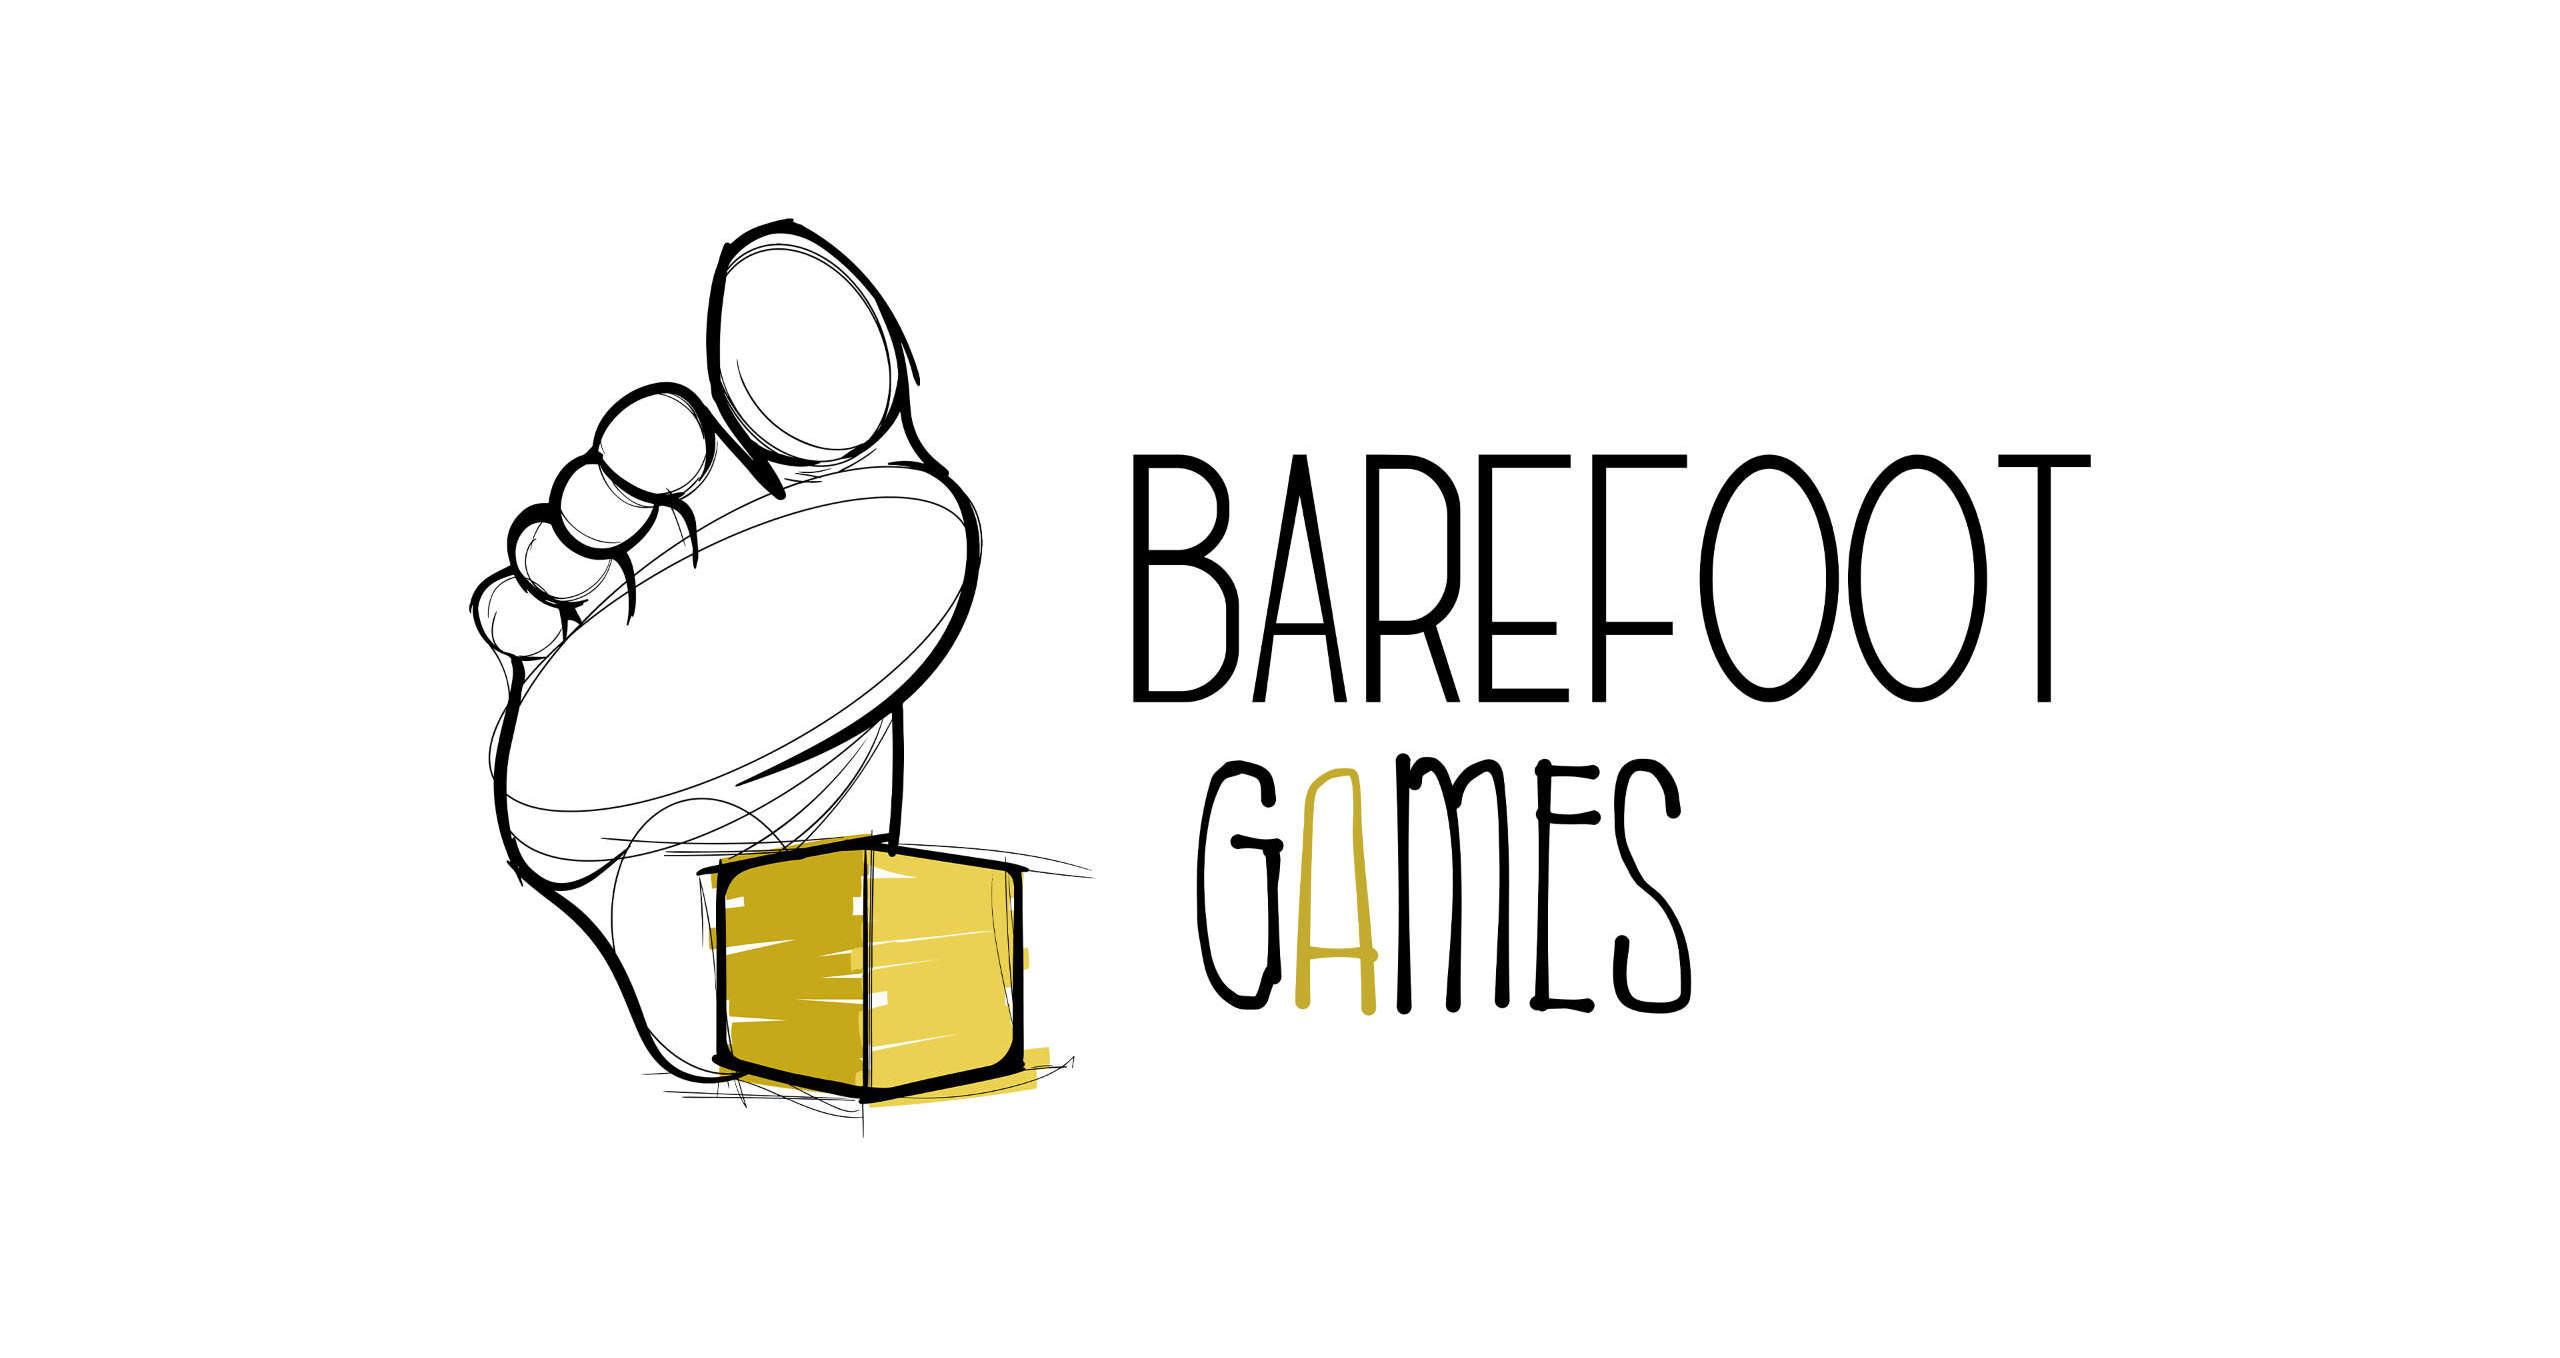 barefoot games logo of a foot stepping on a yellow die